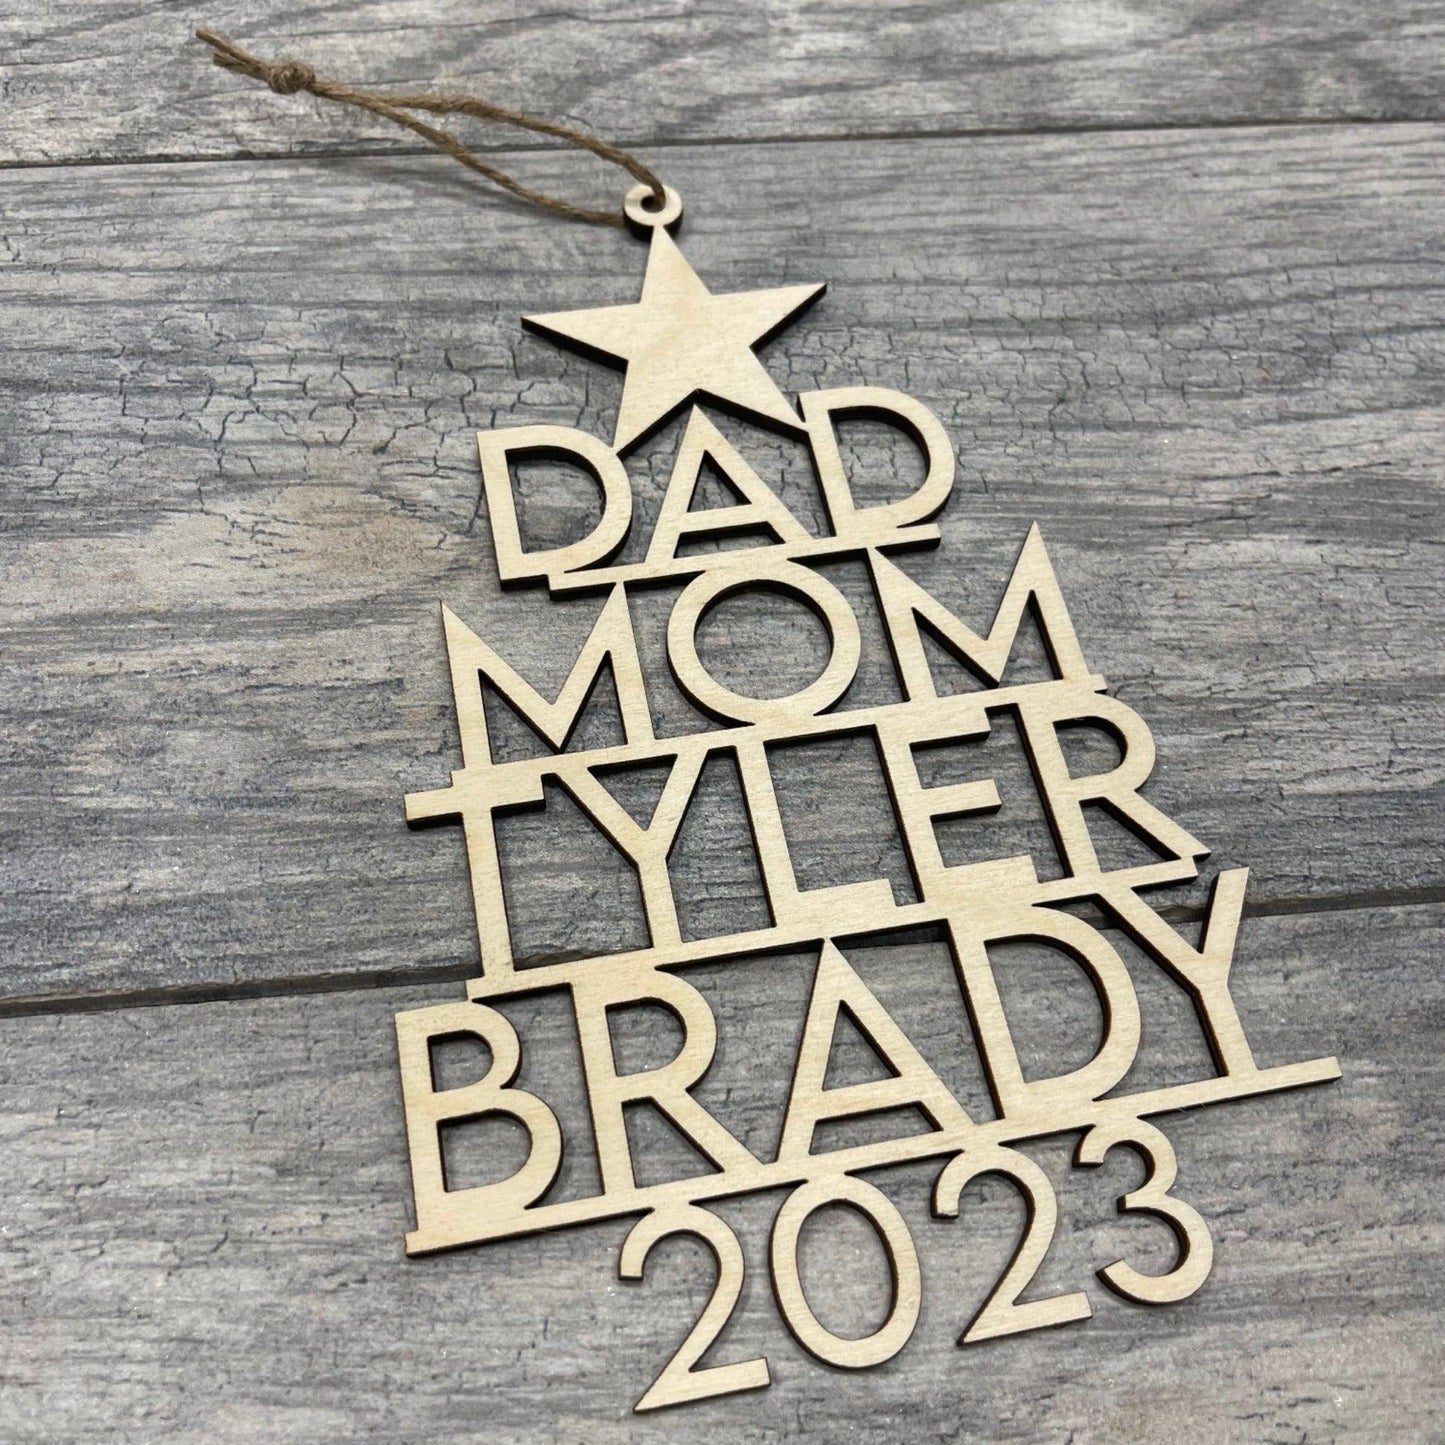 Personalized Family Christmas Ornament